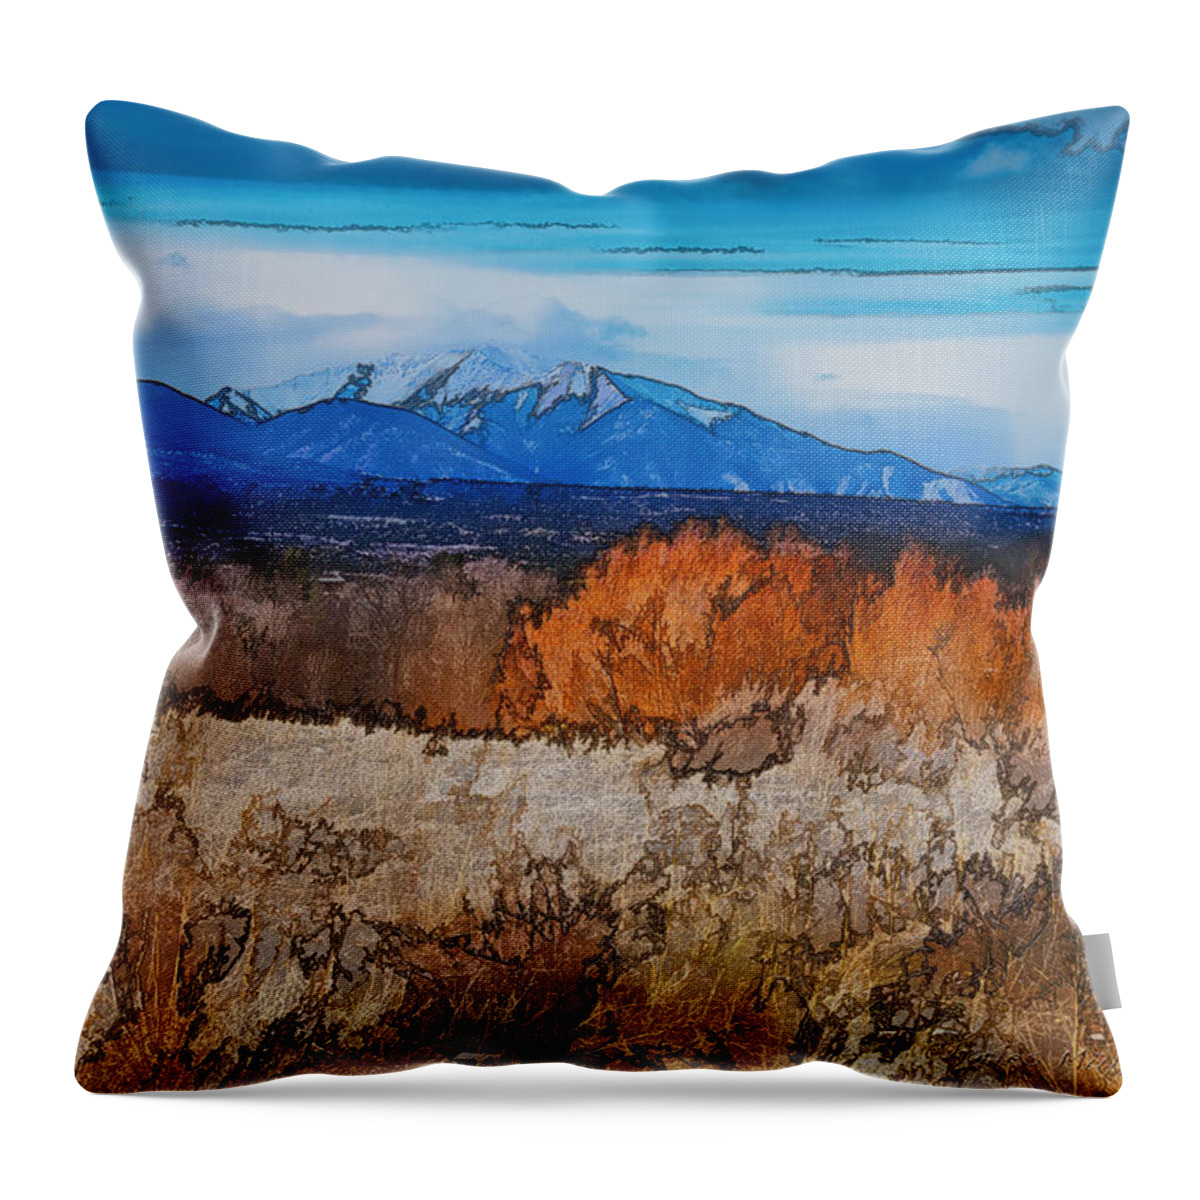 Topaz Throw Pillow featuring the photograph Mount Princeton by Charles Muhle